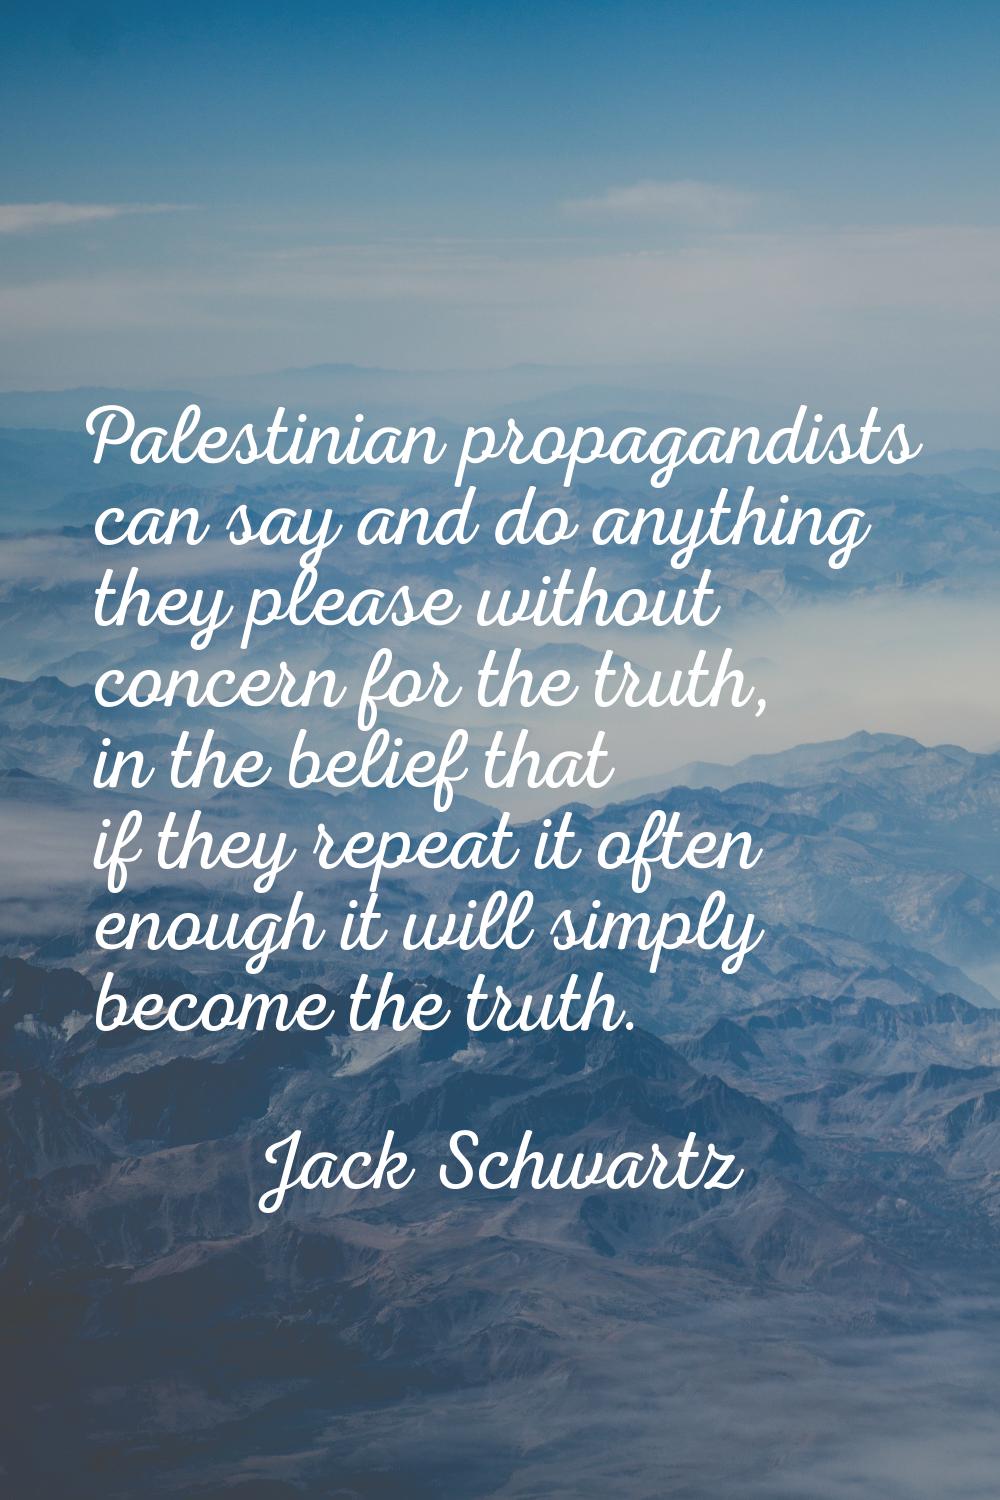 Palestinian propagandists can say and do anything they please without concern for the truth, in the